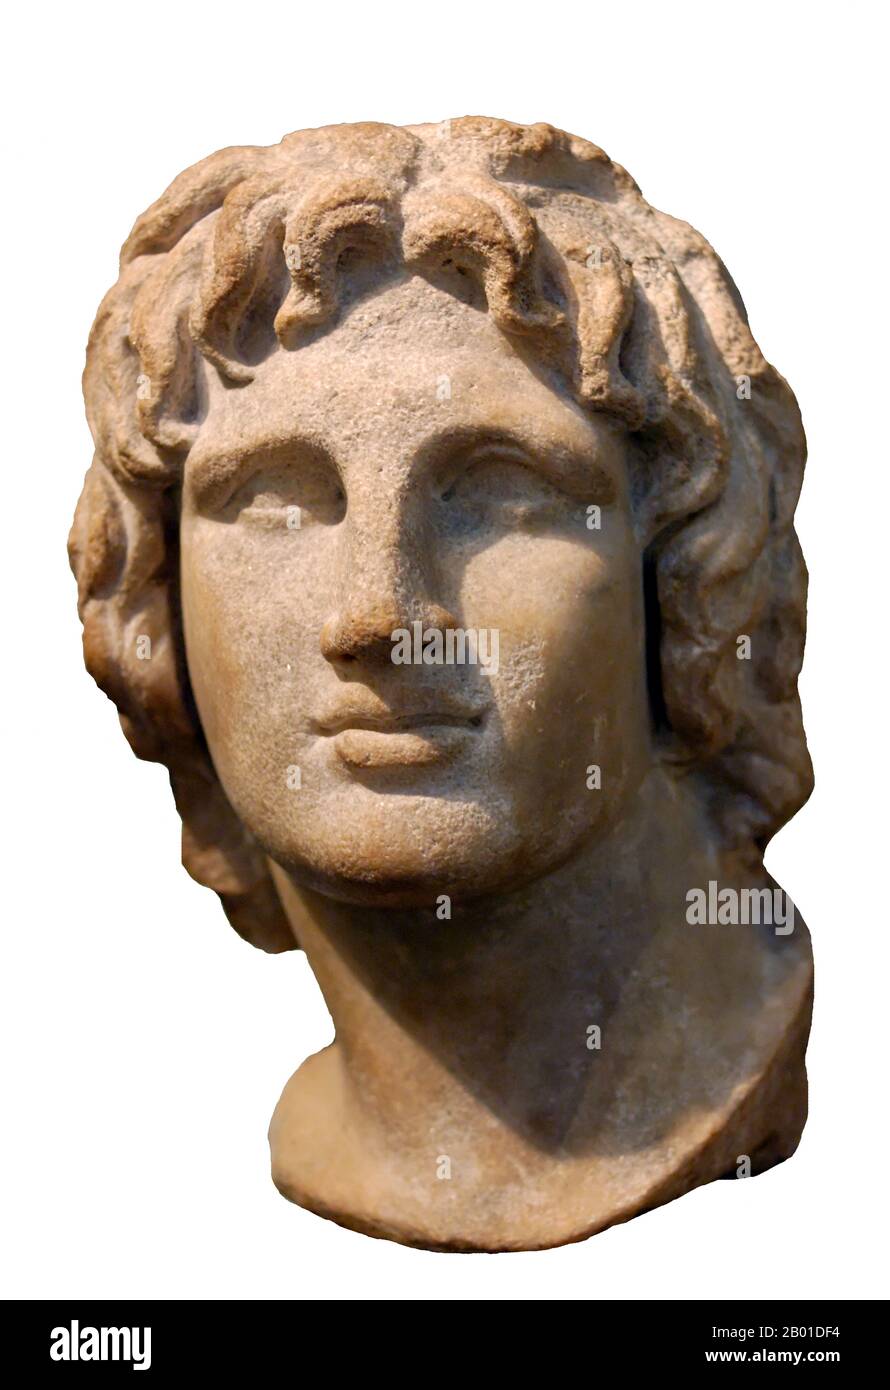 Greece: Marble bust of Alexander the Great at the British Museum, London, 2nd-1st century BCE.  Alexander III of Macedon (20/21 July 356 - 10/11 June 323 BC), commonly known as Alexander the Great (Greek: Mégas Aléxandros), was a king of Macedon, a state in the north eastern region of Greece, and by the age of thirty was the creator of one of the largest empires in ancient history, stretching from the Ionian Sea to the Himalaya.  He was undefeated in battle and is considered one of the most successful commanders of all time. Stock Photo